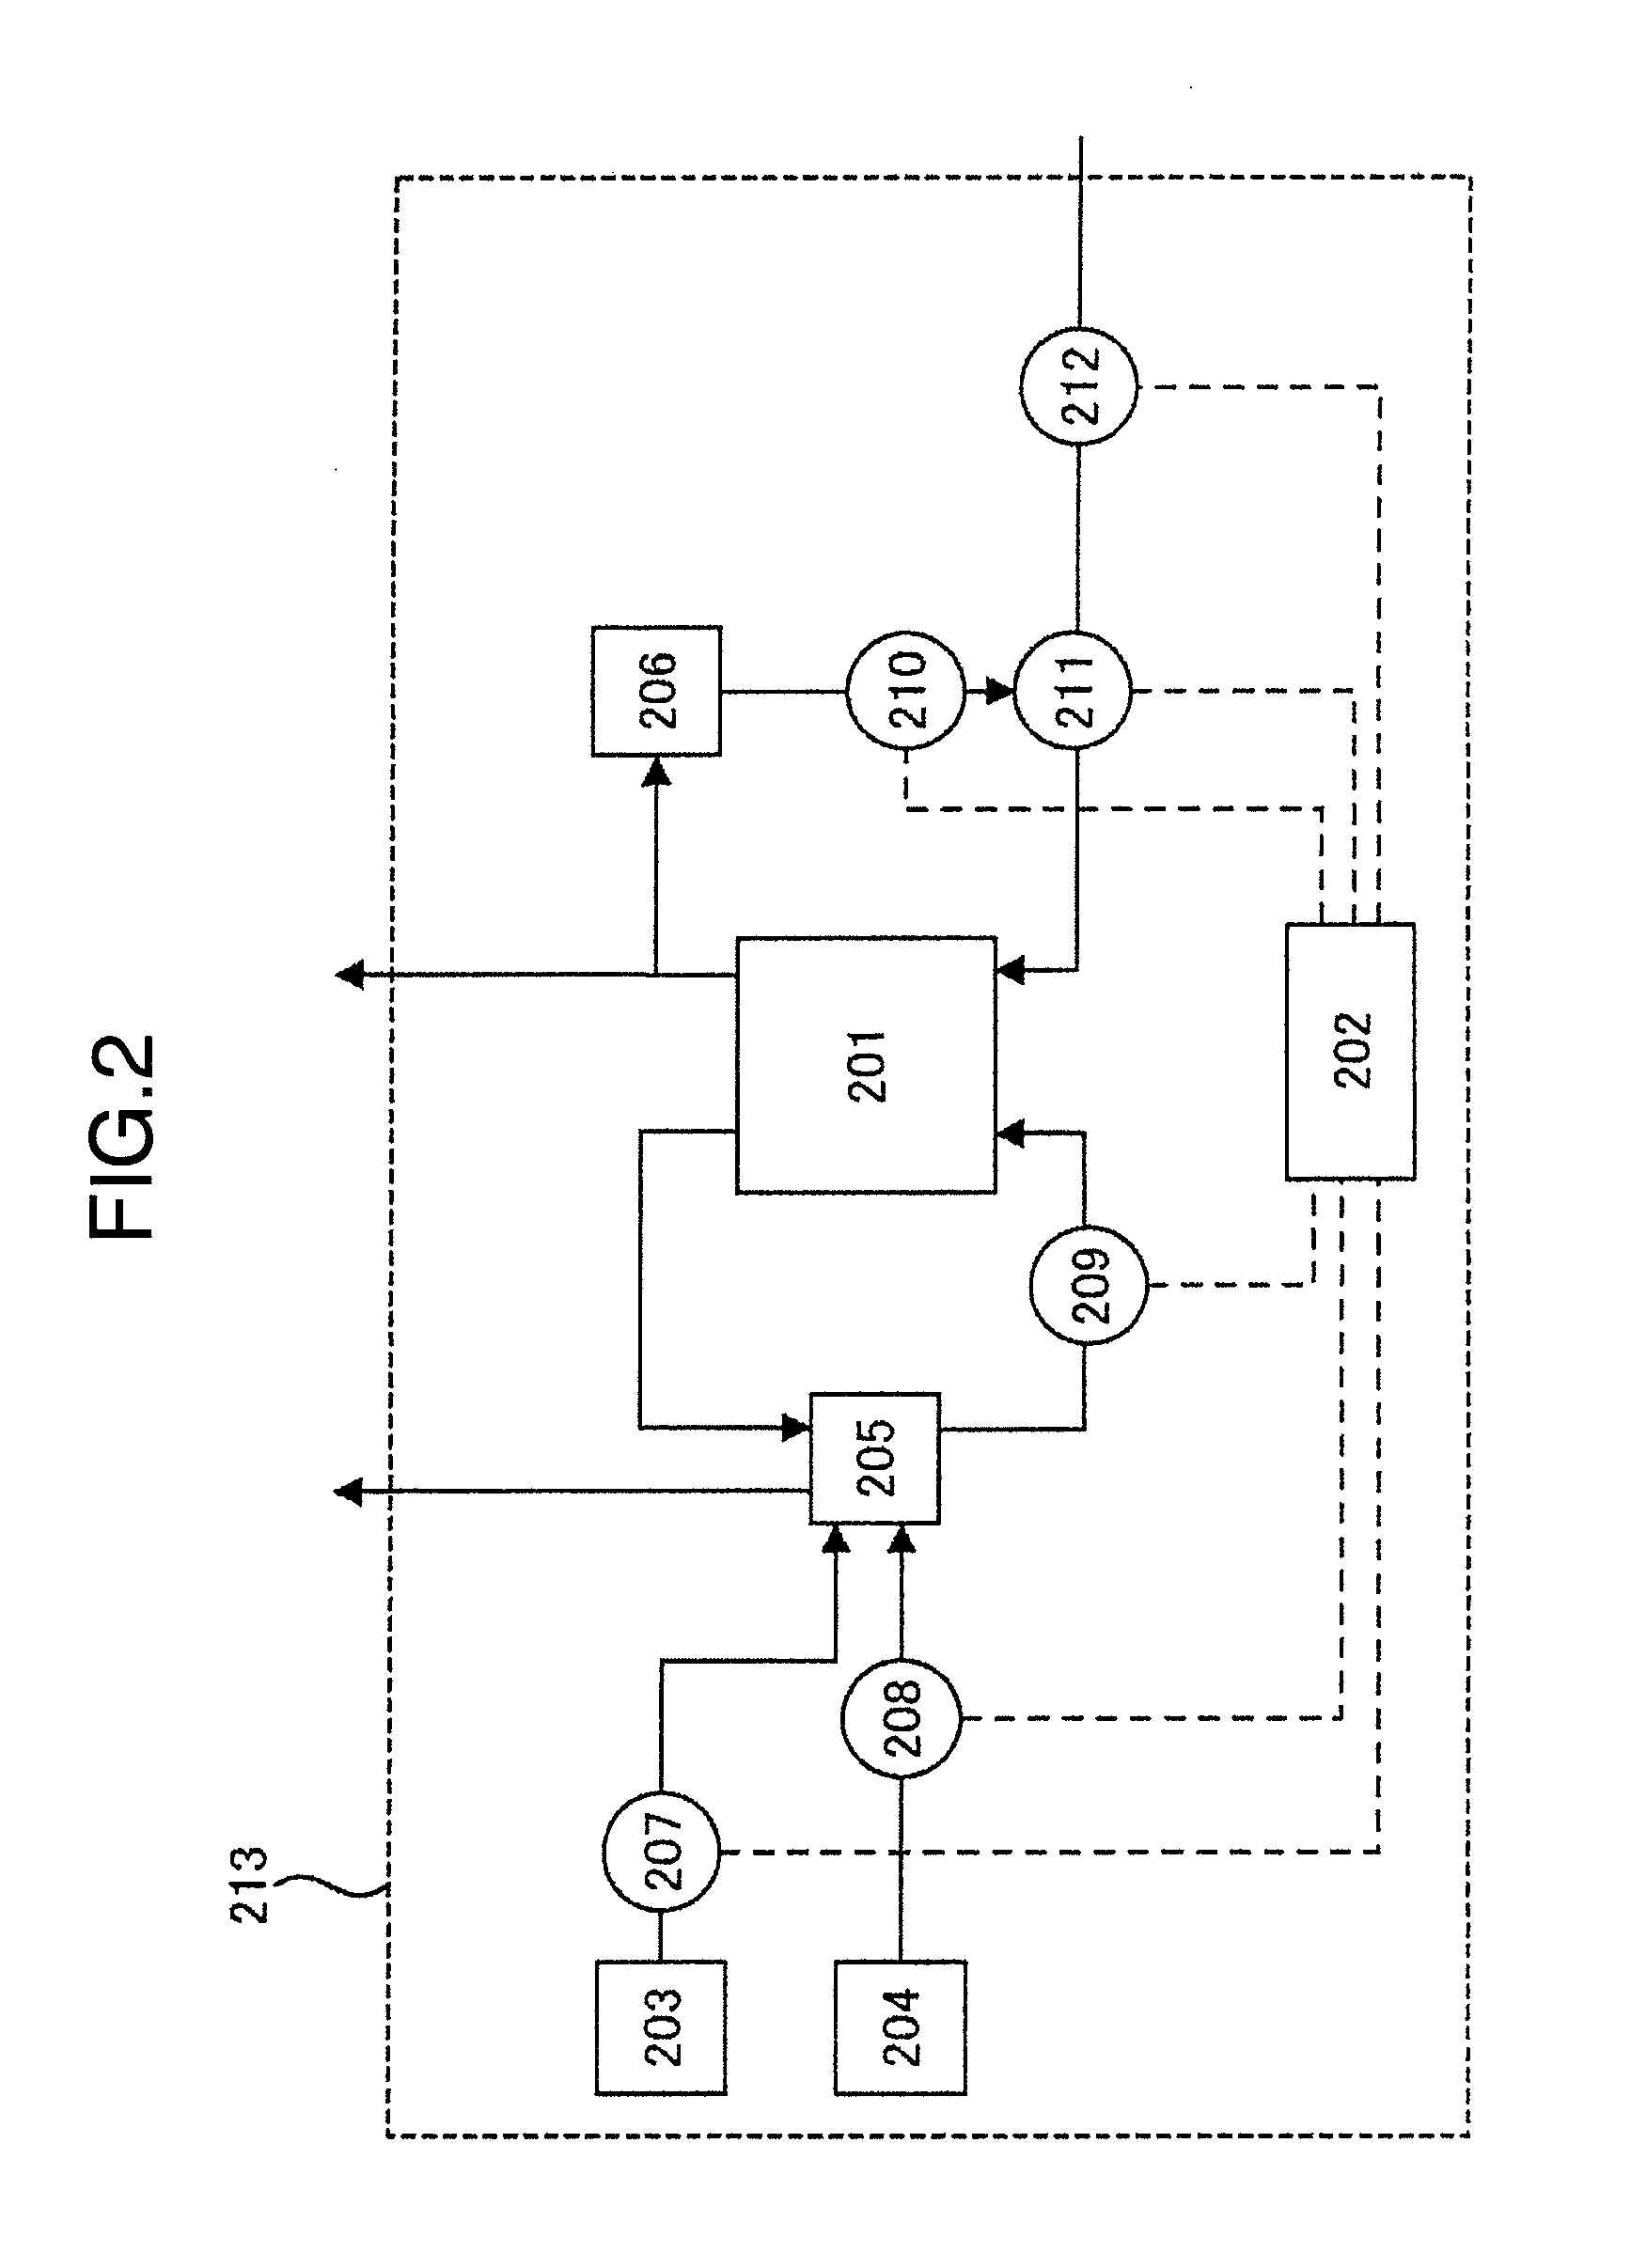 Fuel battery system